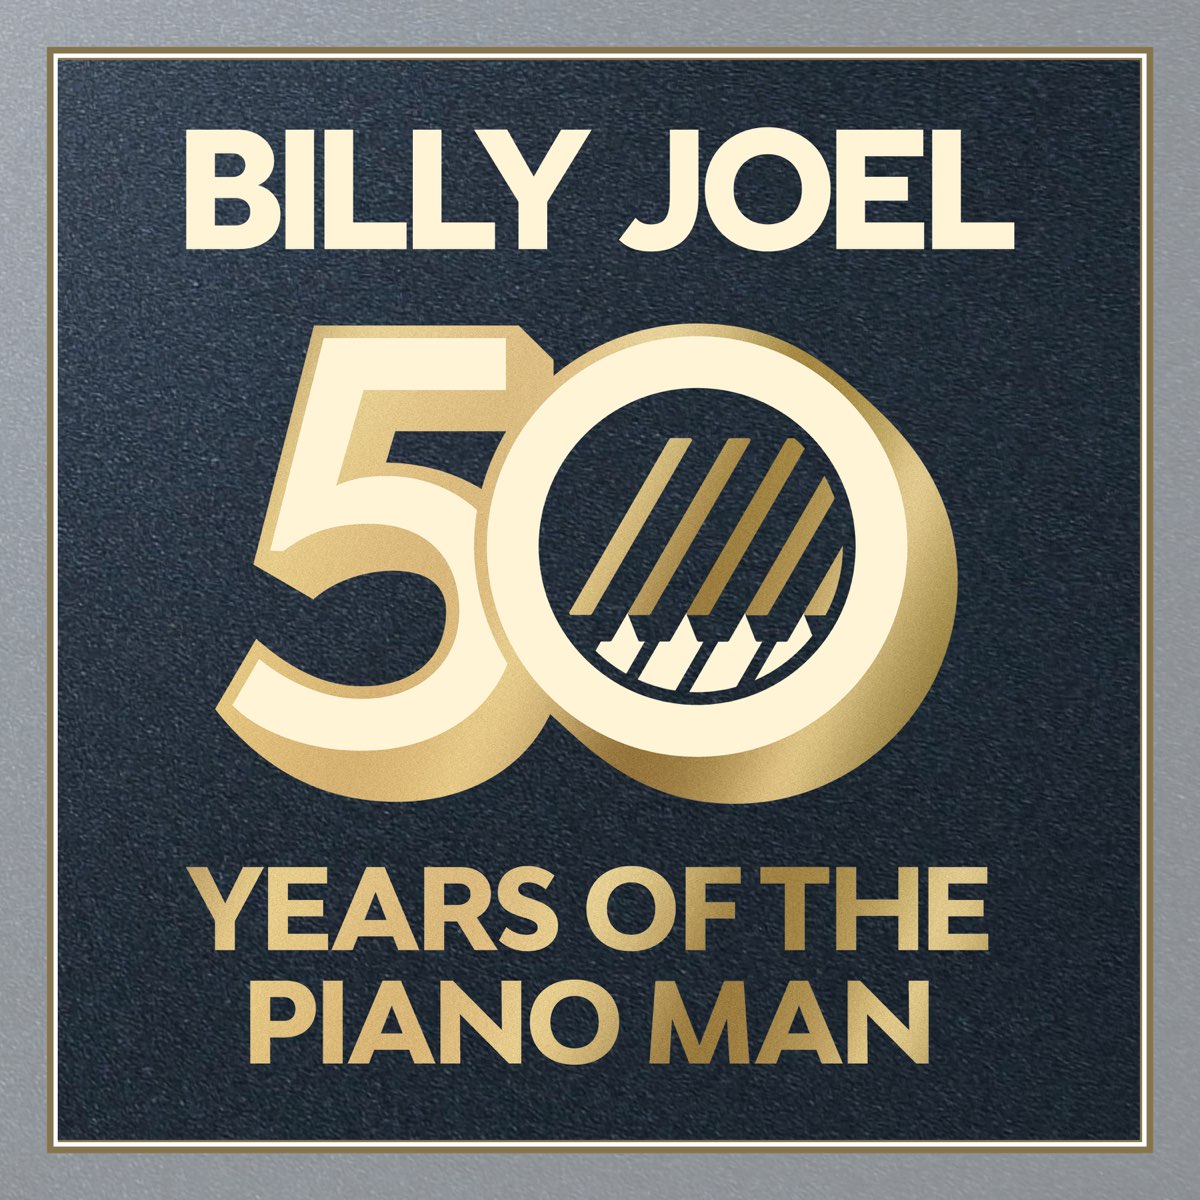 50 Years of the Piano Man - Album by Billy Joel - Apple Music